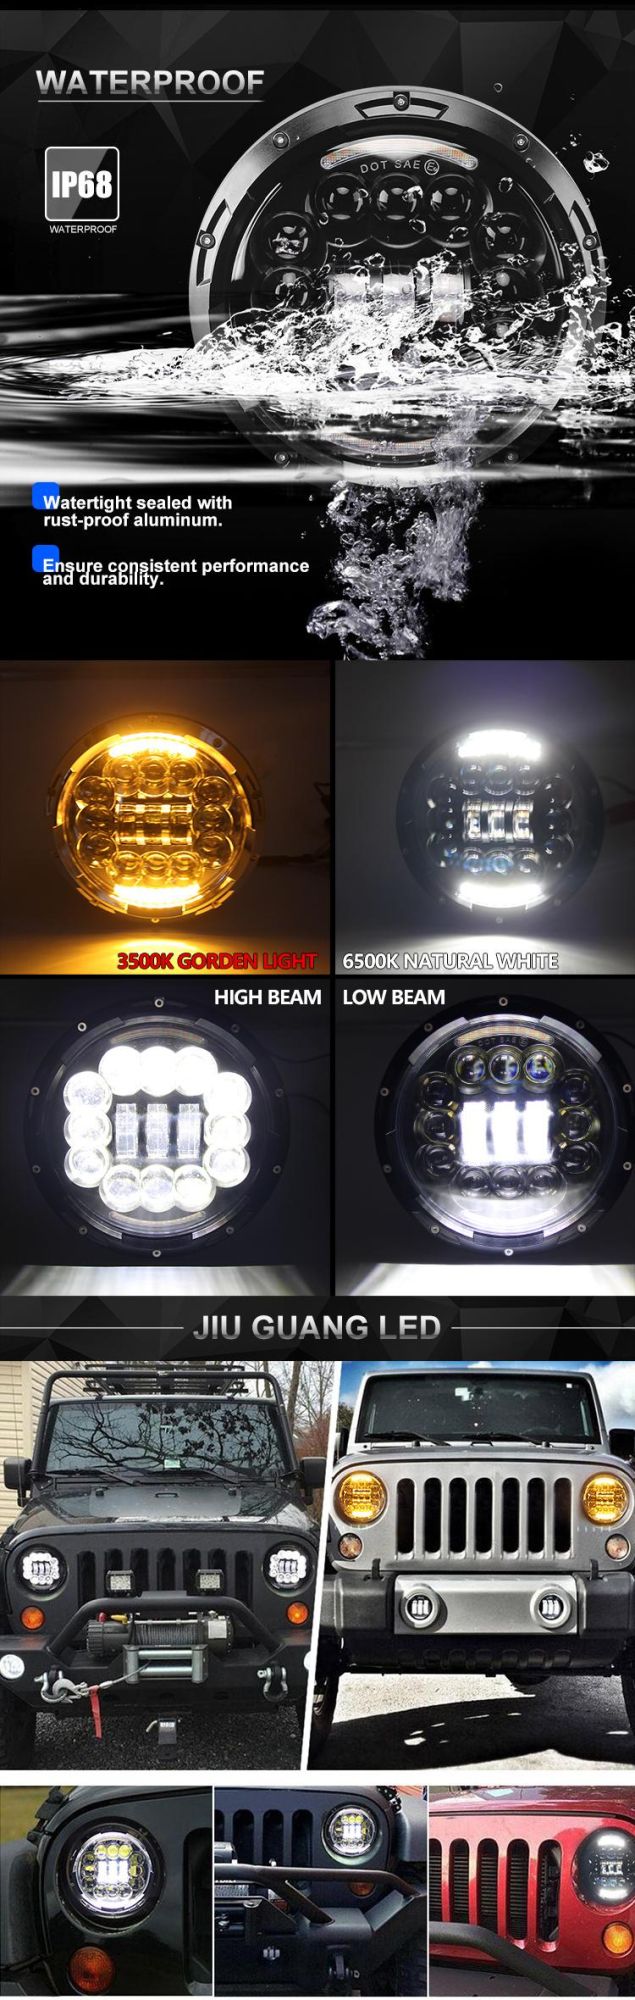 Offroad 4X4 7inch LED Headlight for Jeep Wrangler